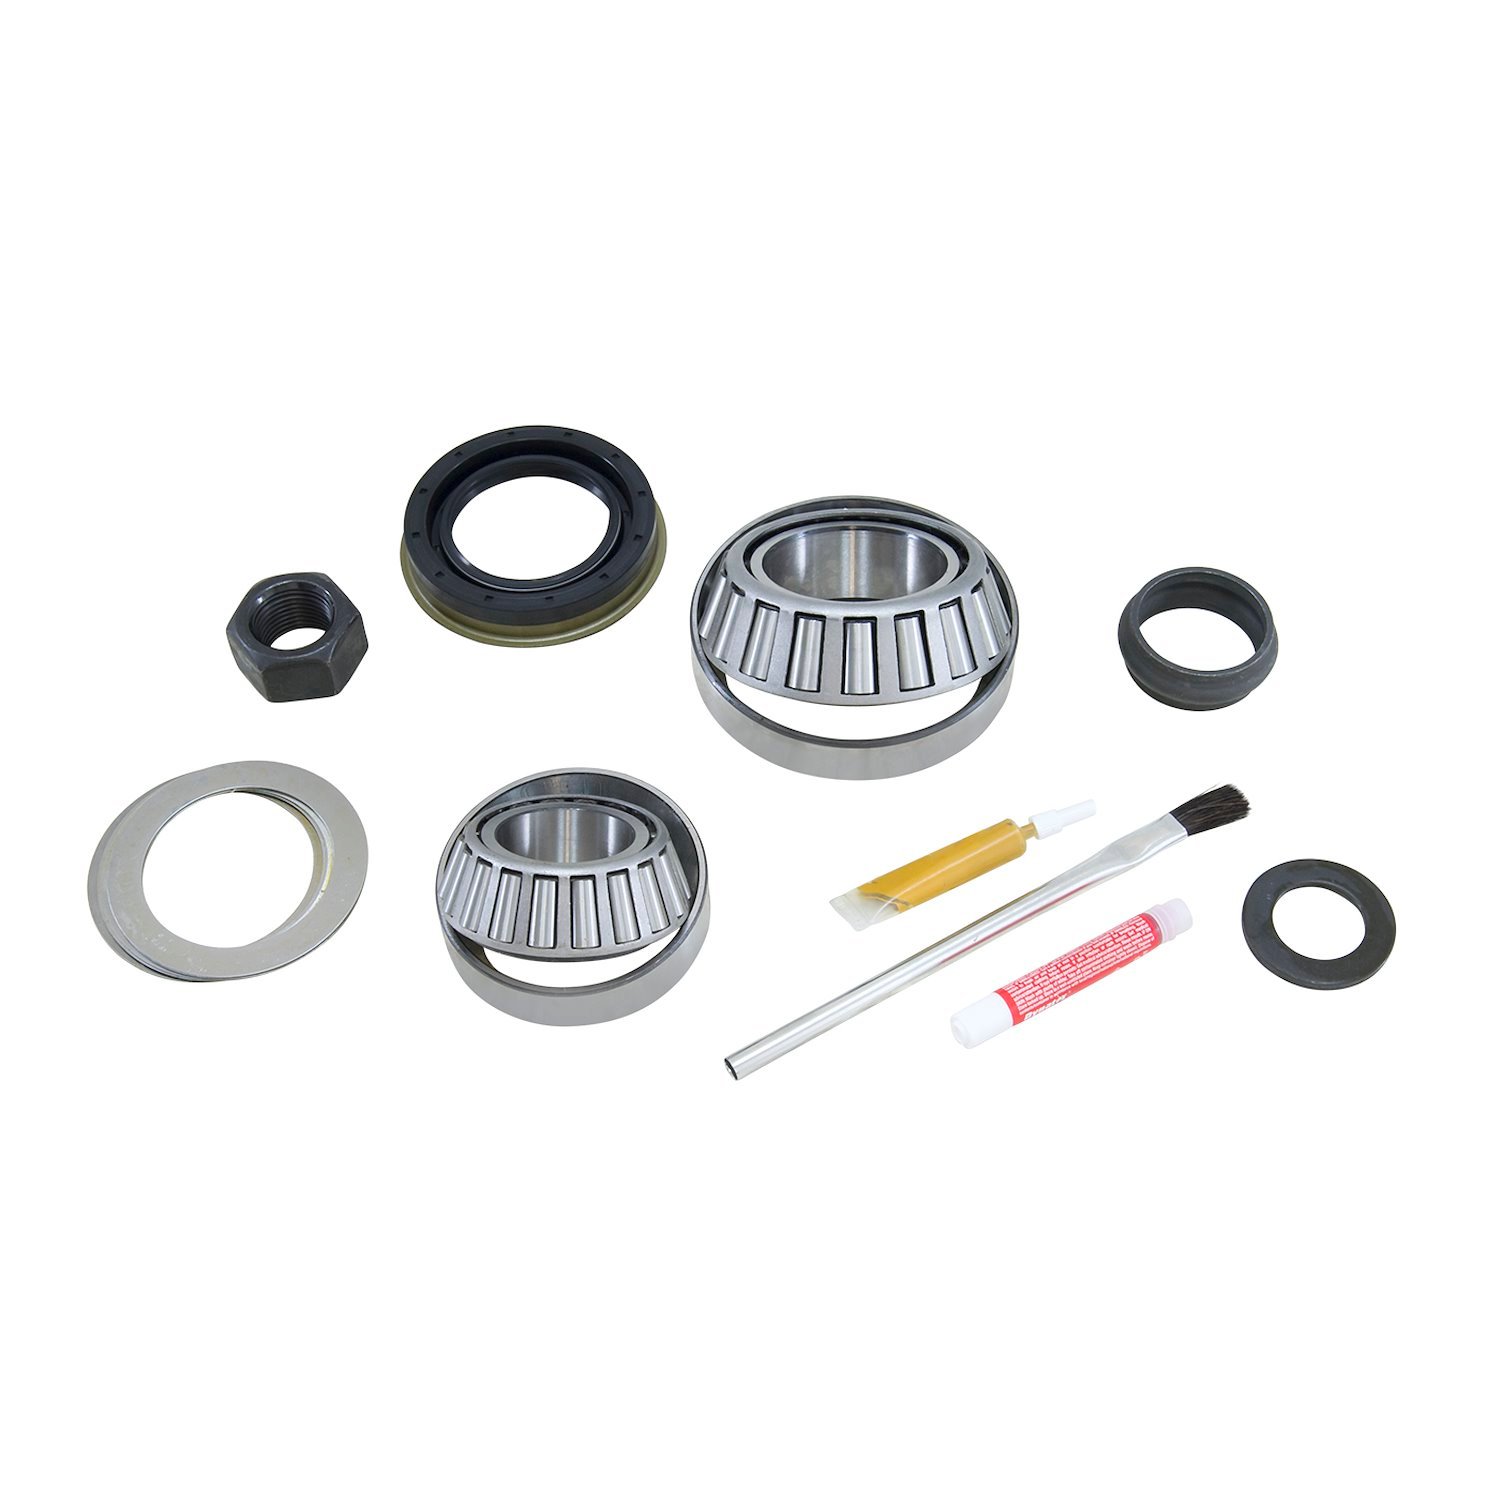 Pinion Install Kit For Dana 30 Differential, With Crush Sleeve